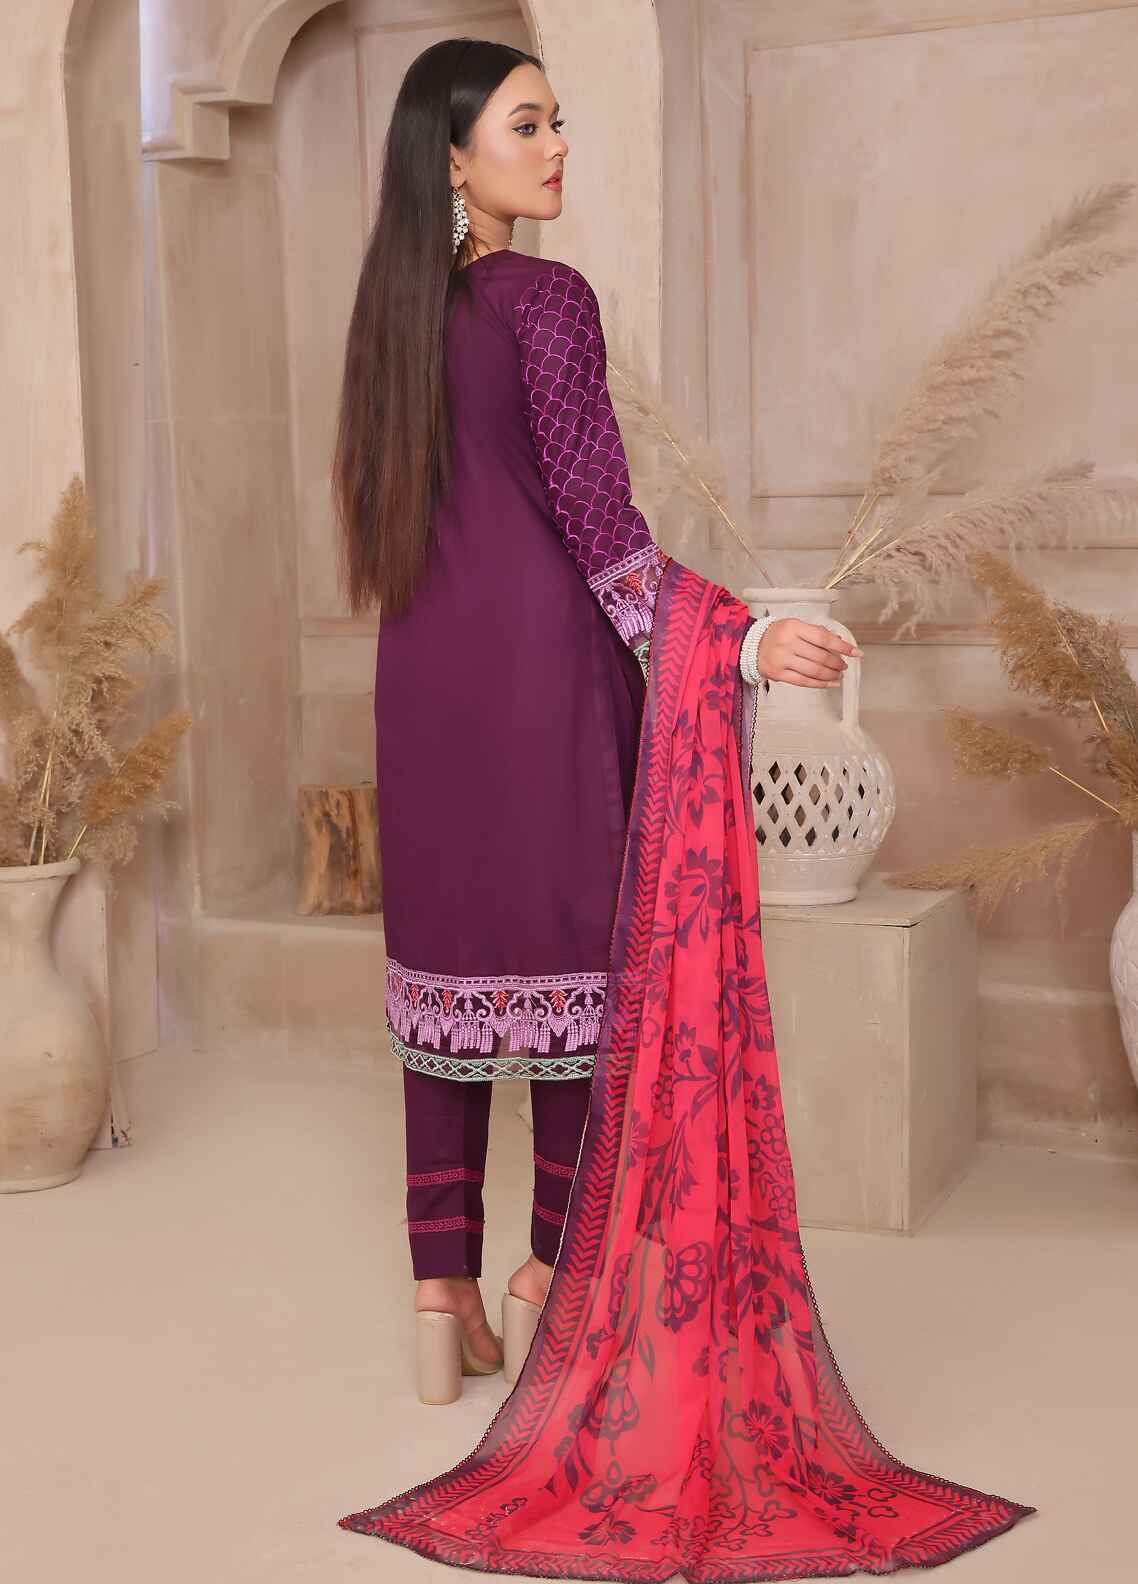 Tehzeeb By Polawn Embroidered Stitched 3 Piece Lawn Suit PD-24-304 - Ready to Wear